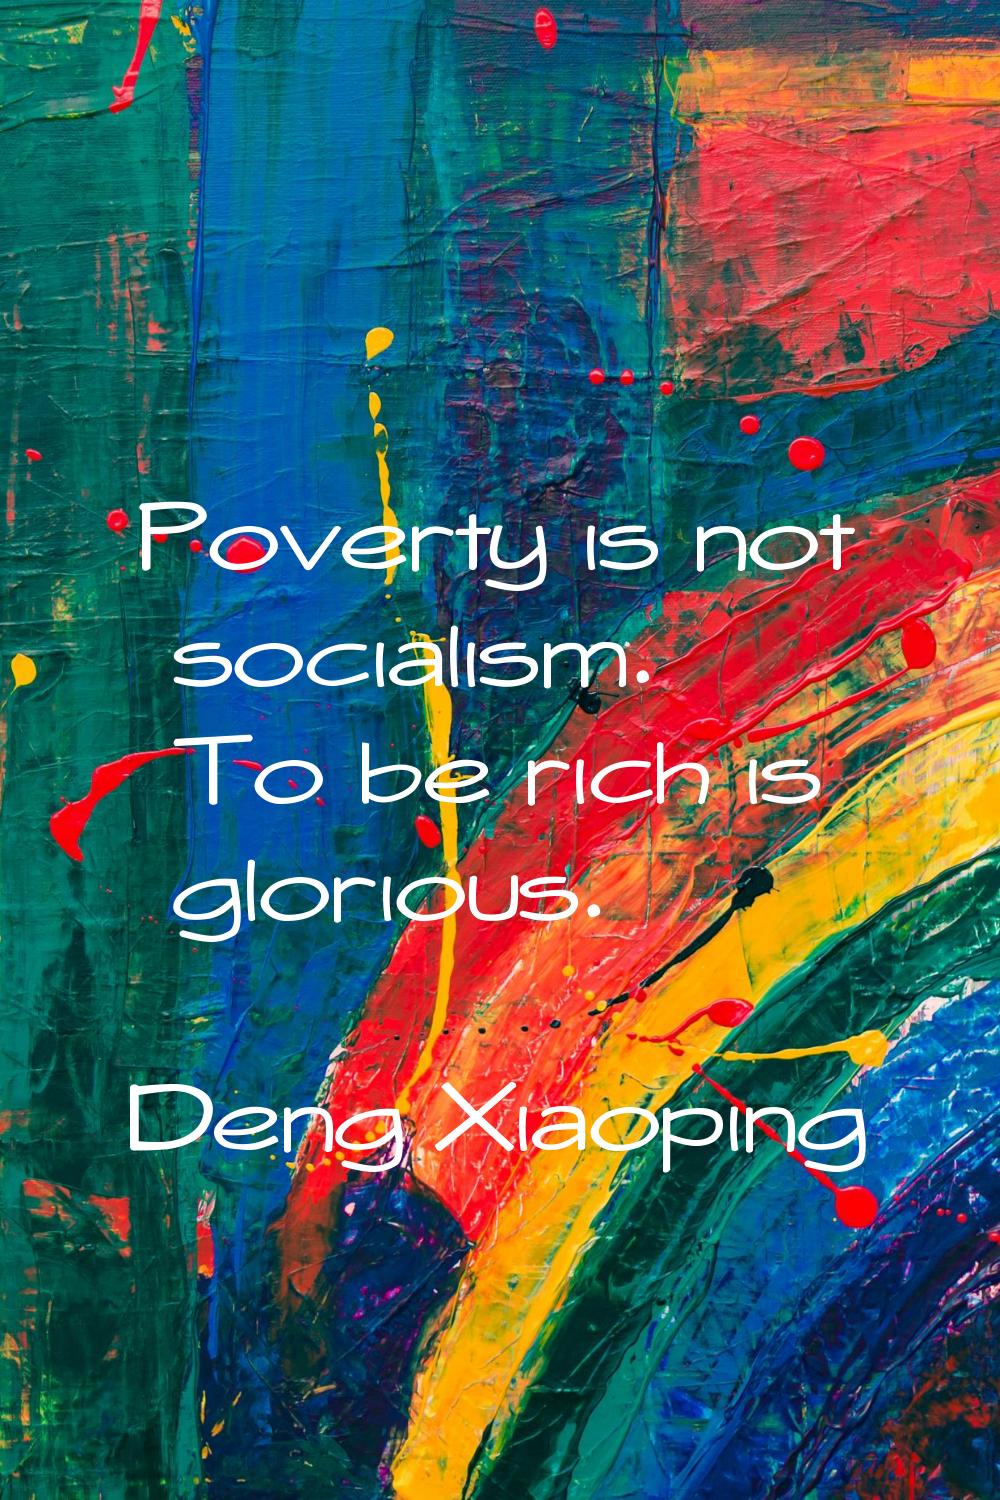 Poverty is not socialism. To be rich is glorious.